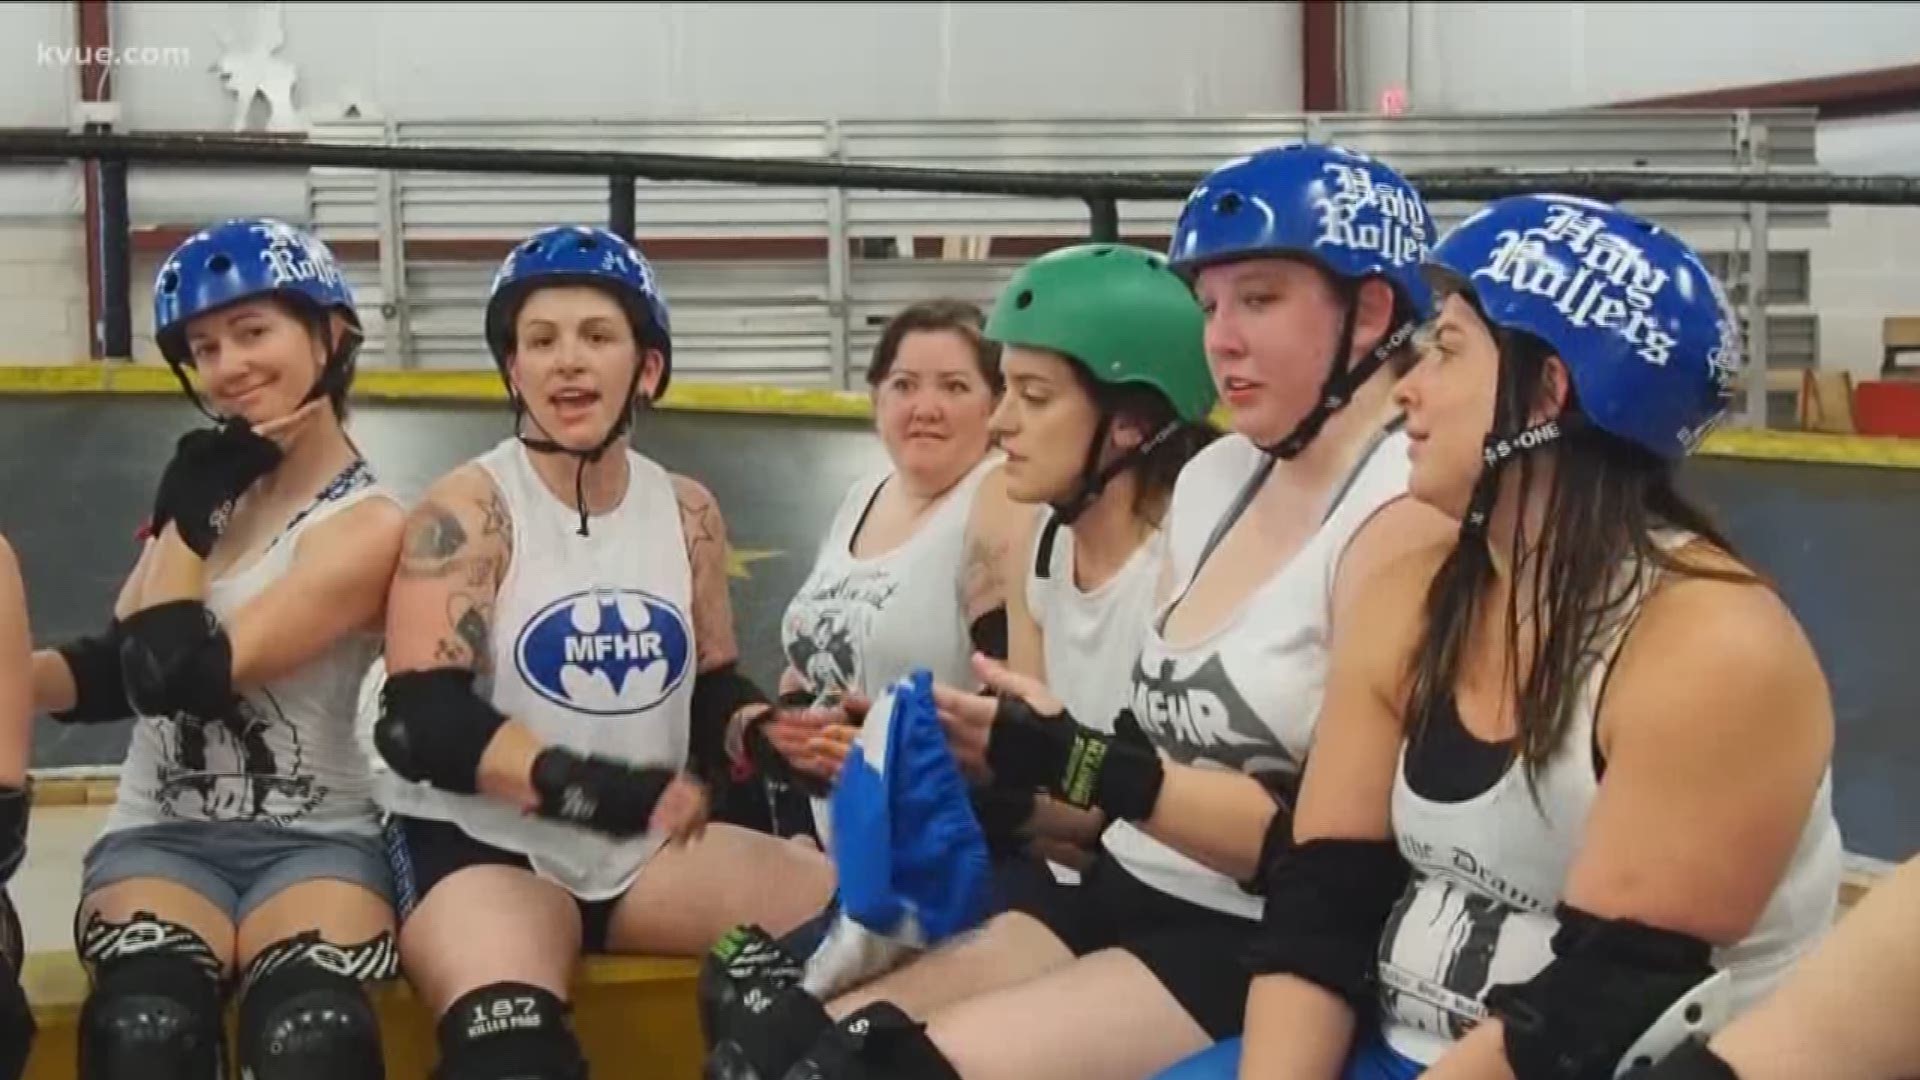 Brittany Flowers learned that while there are rivalries between the tough women who play in the TXRD league, Texas Roller Derby is a close-knit community.